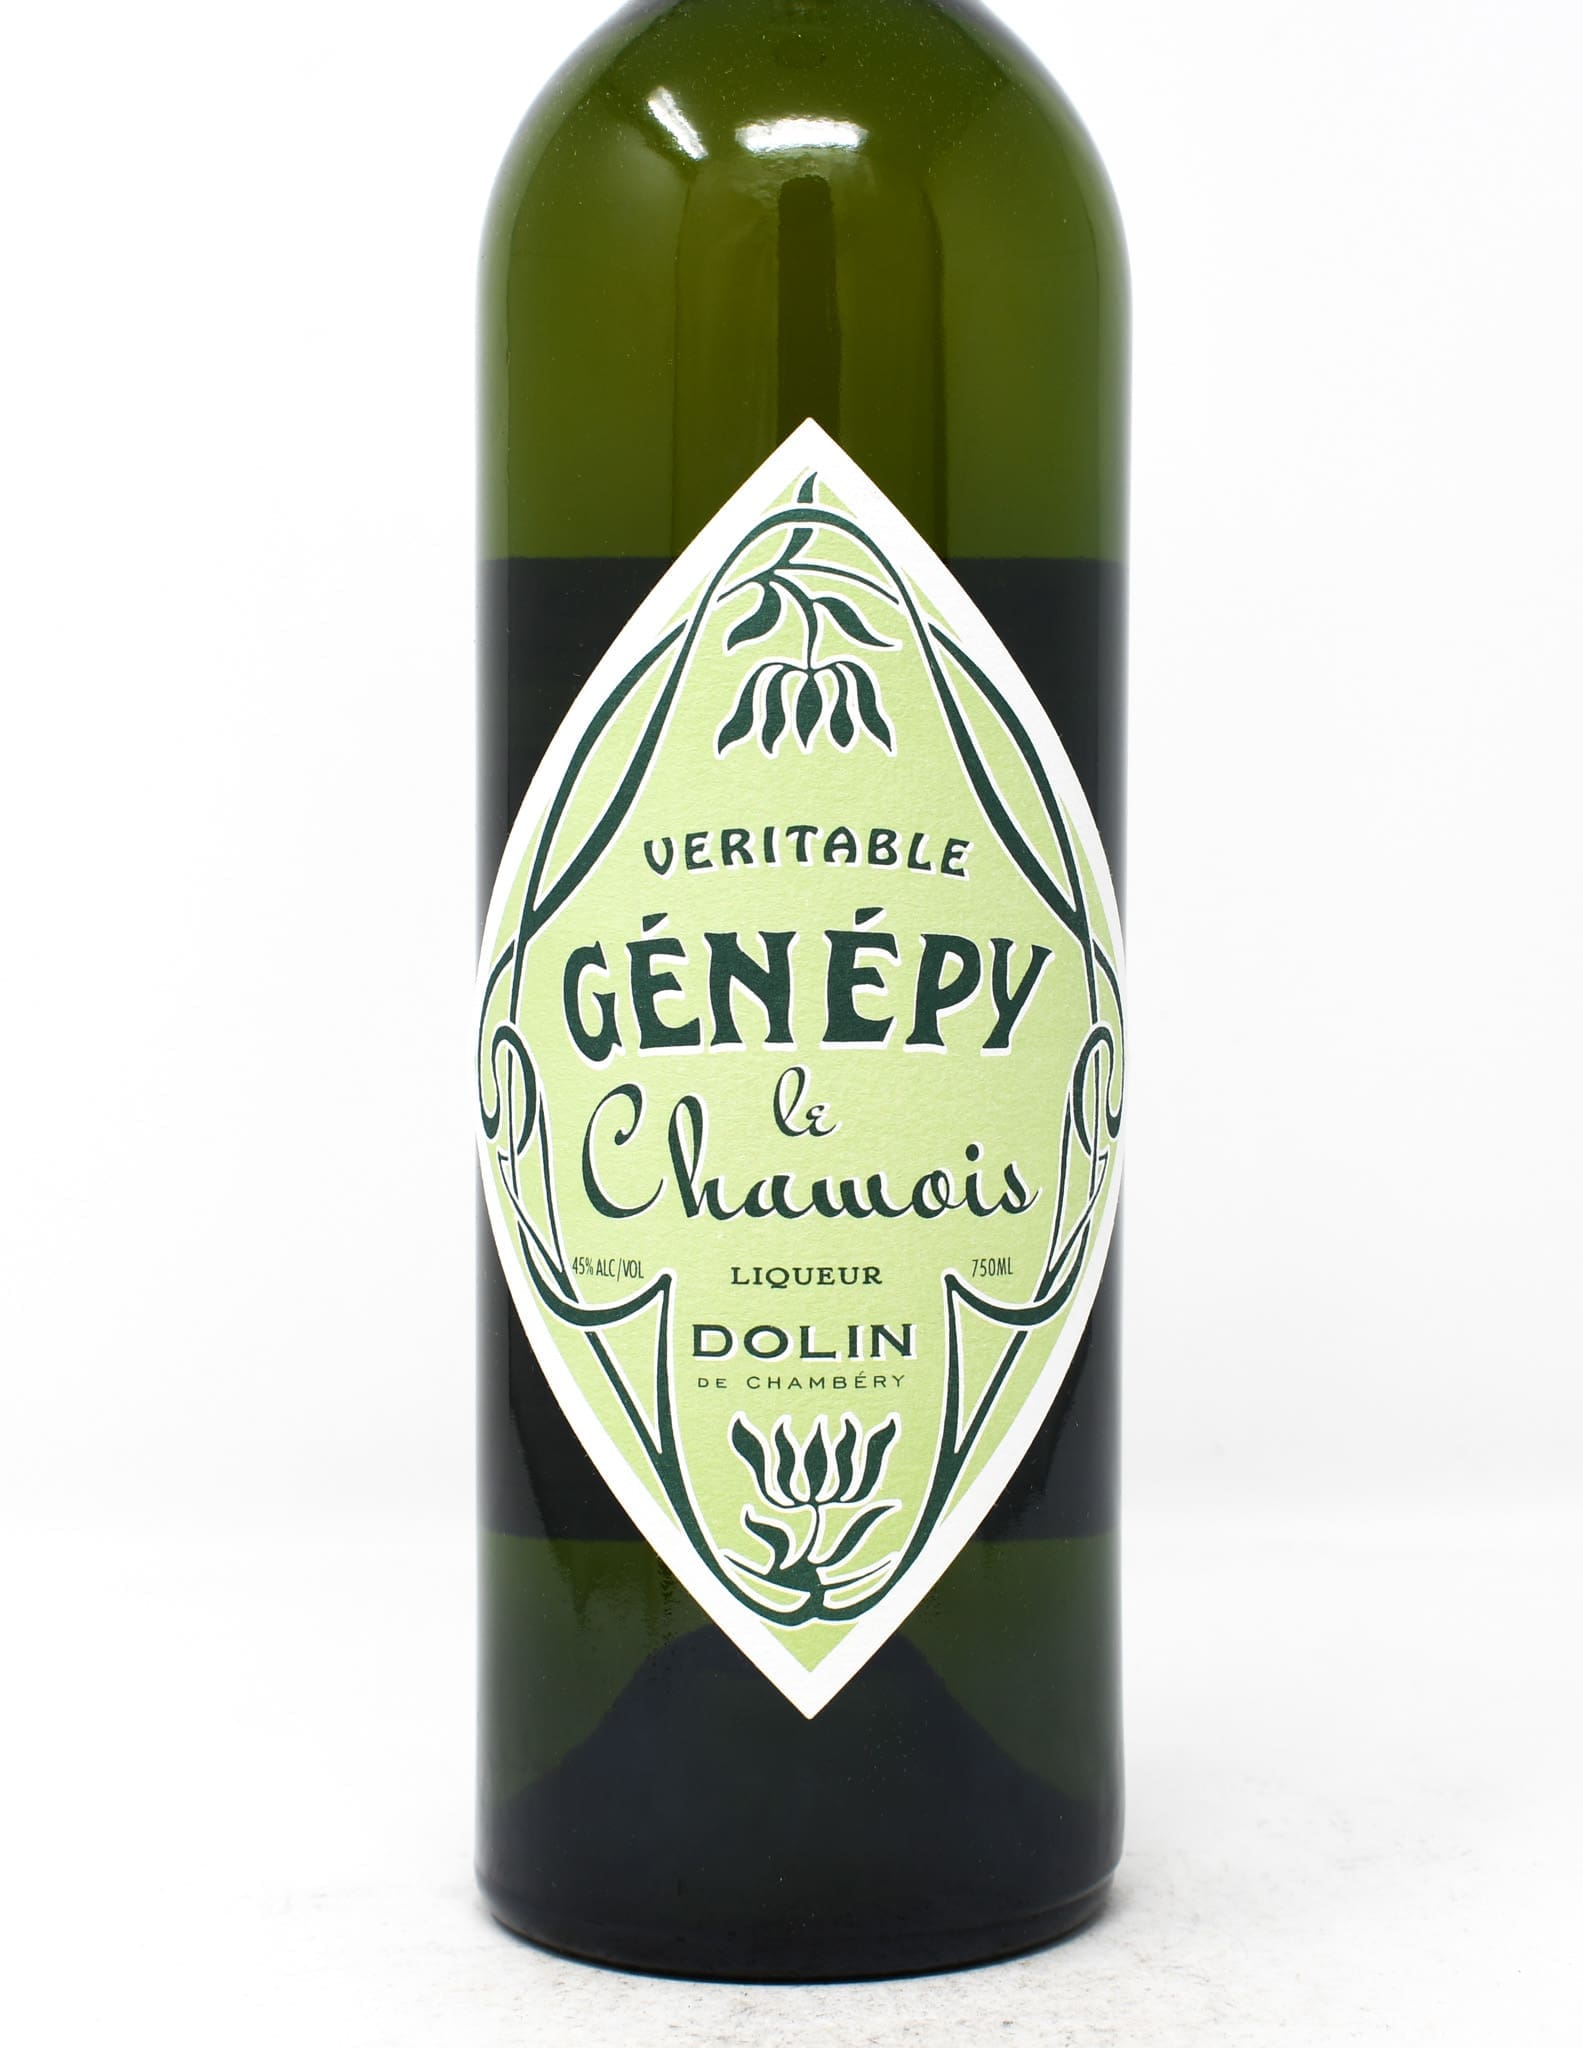 Genepi from the Alps